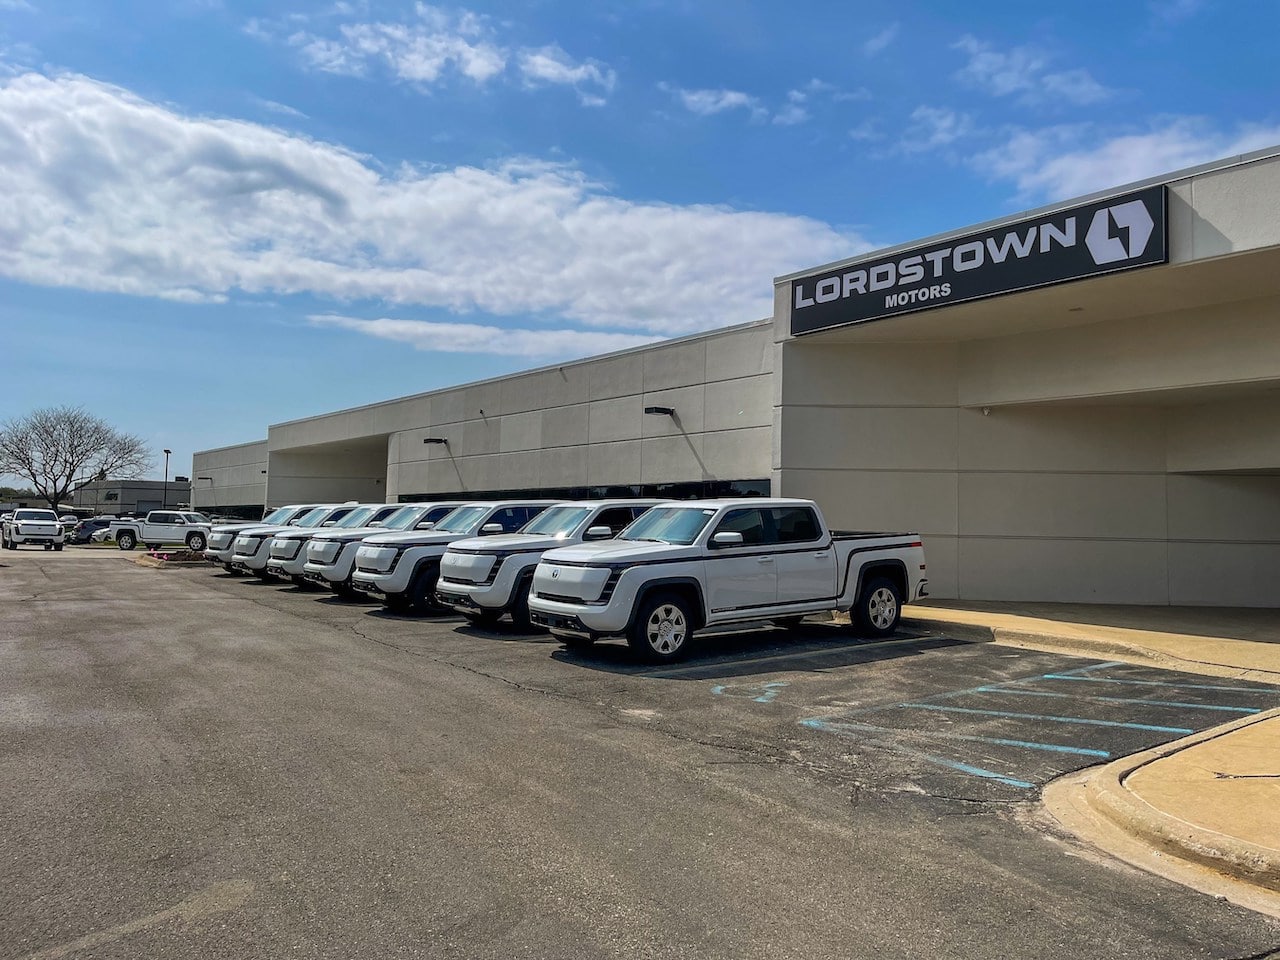 Lordstown Motors and Foxconn Close Asset Purchase Agreement and Enter into JV Agreement for MIH Based EV Development